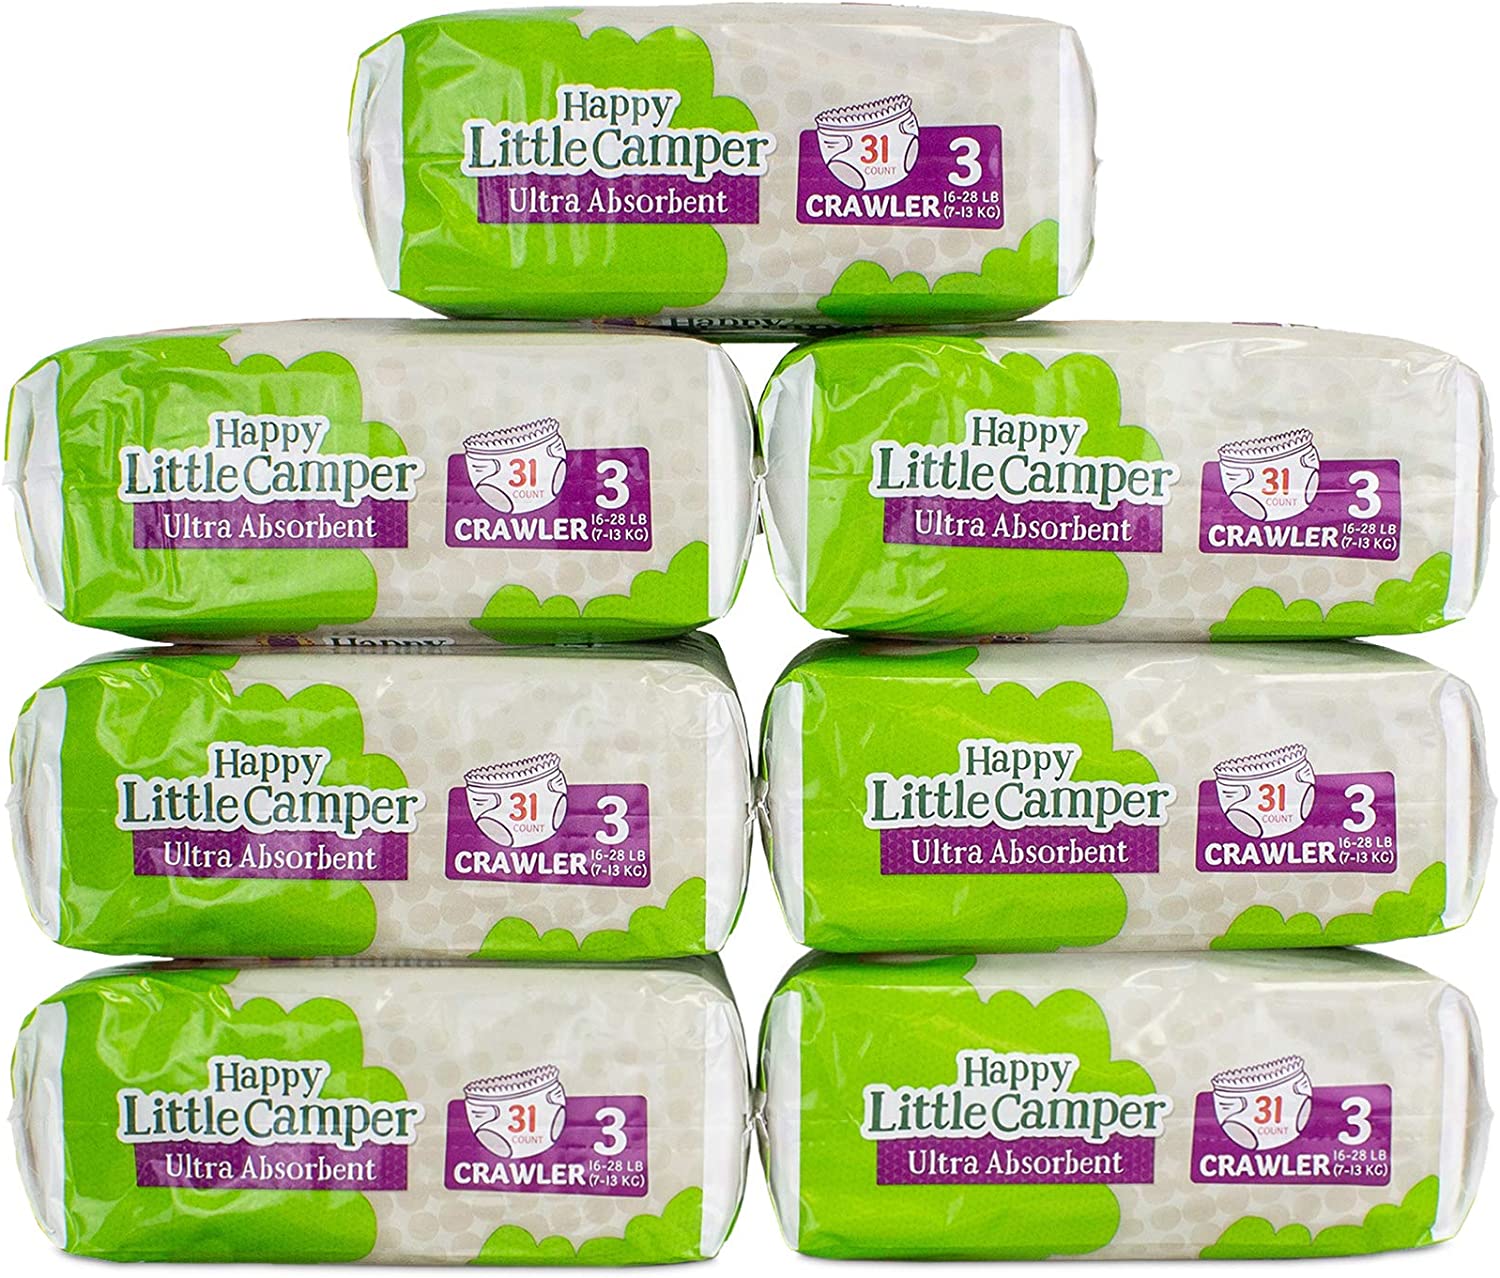 Happy Little Camper Ultra-Absorbent Hypoallergenic Natural Disposable Baby Diapers, Chlorine-Free Protection for Sensitive Skin, Monthly Pack, Size 3, 217 Count